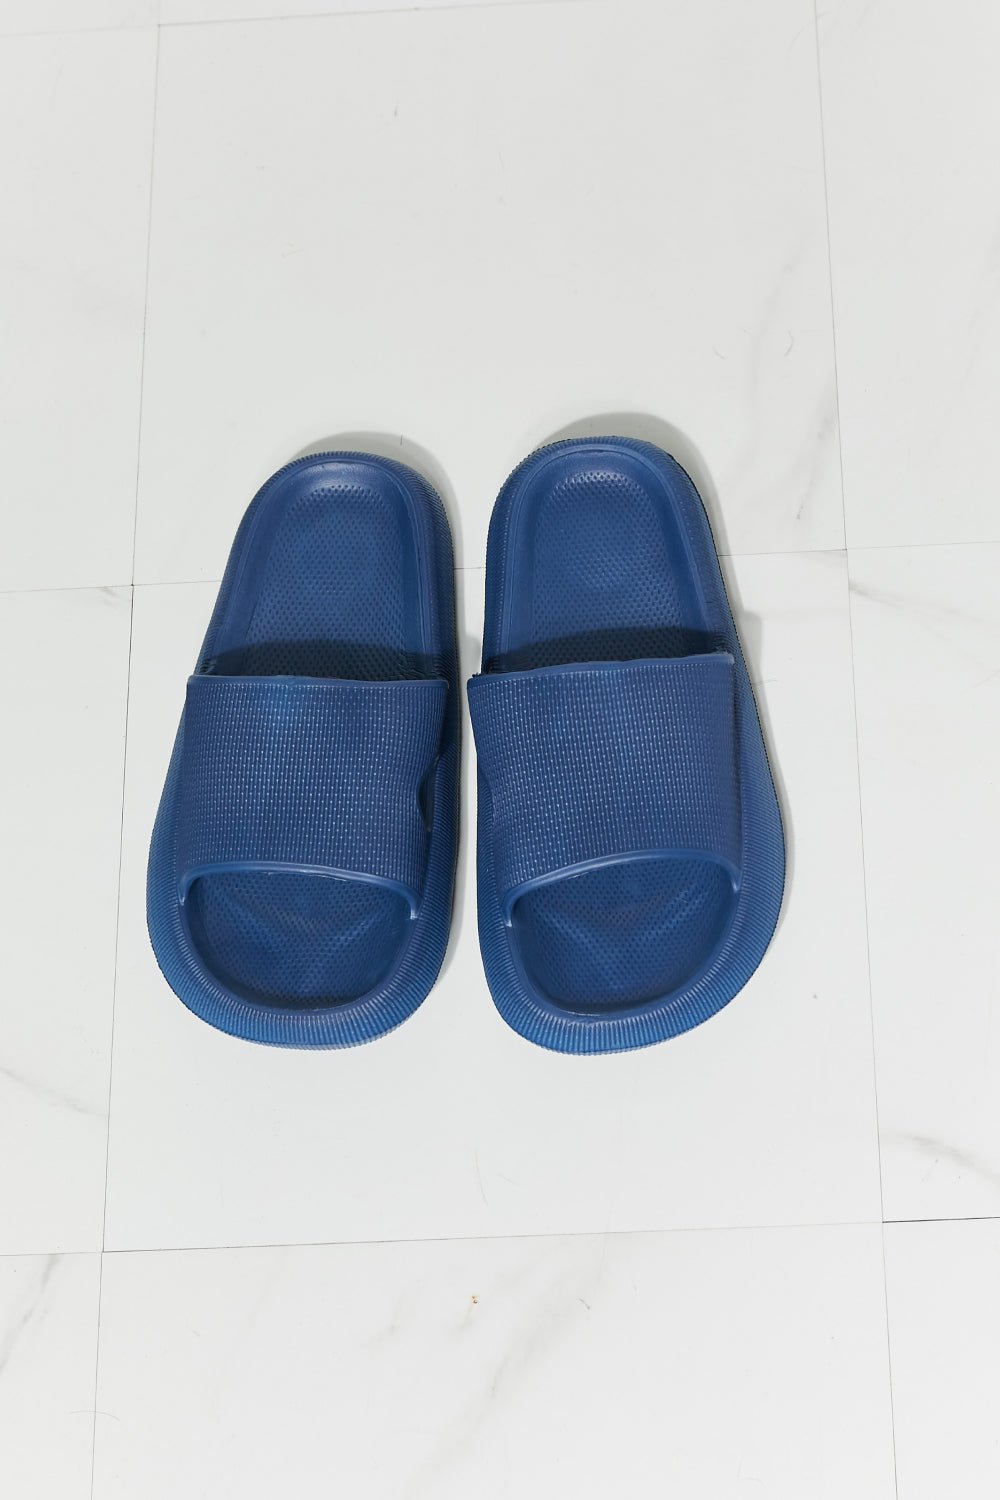 MMShoes Arms Around Me Open Toe Navy Slide - EMMY